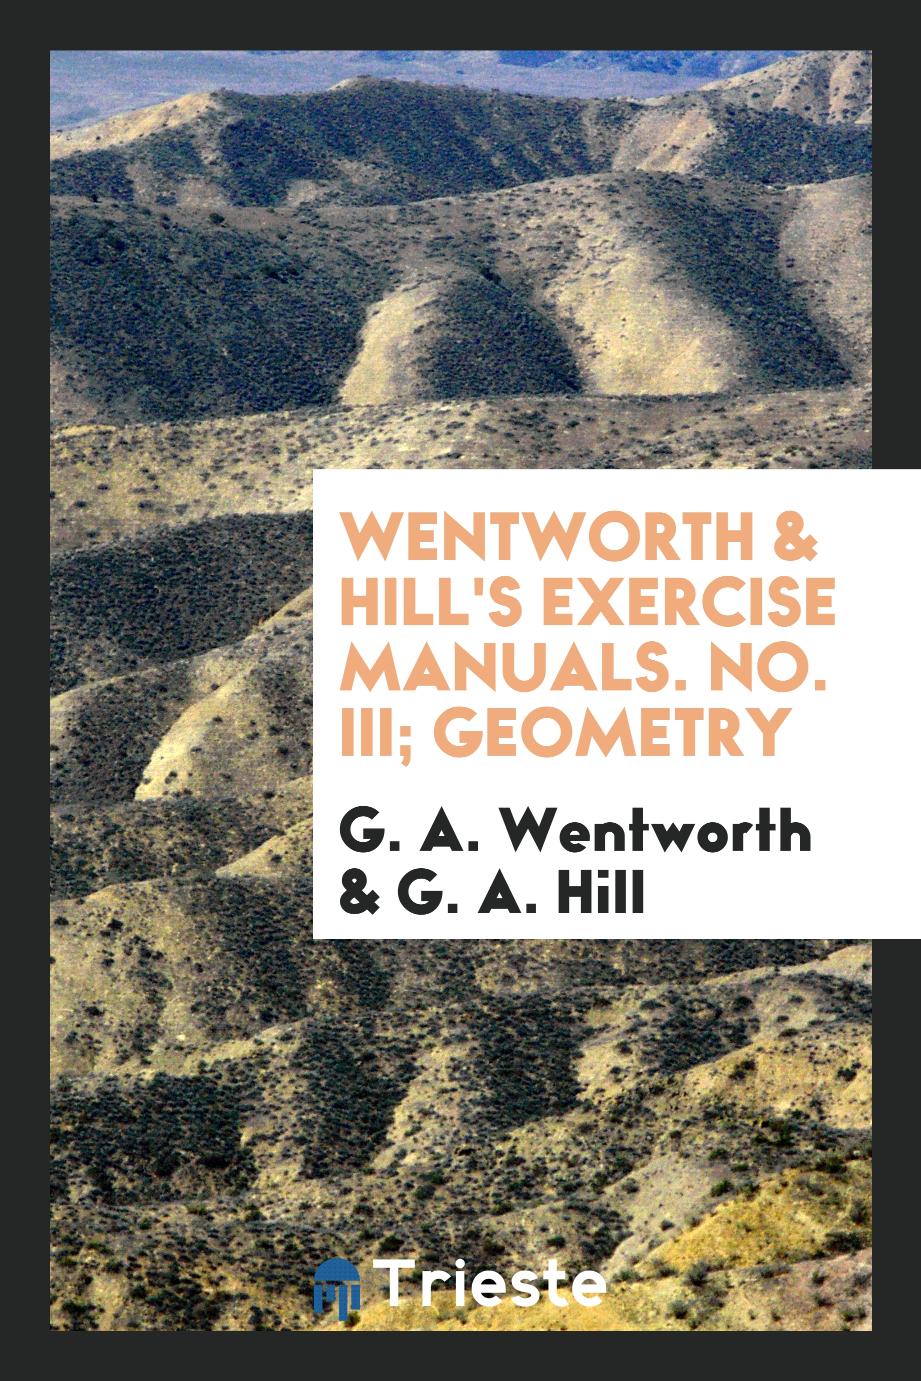 Wentworth & Hill's Exercise Manuals. No. III; Geometry